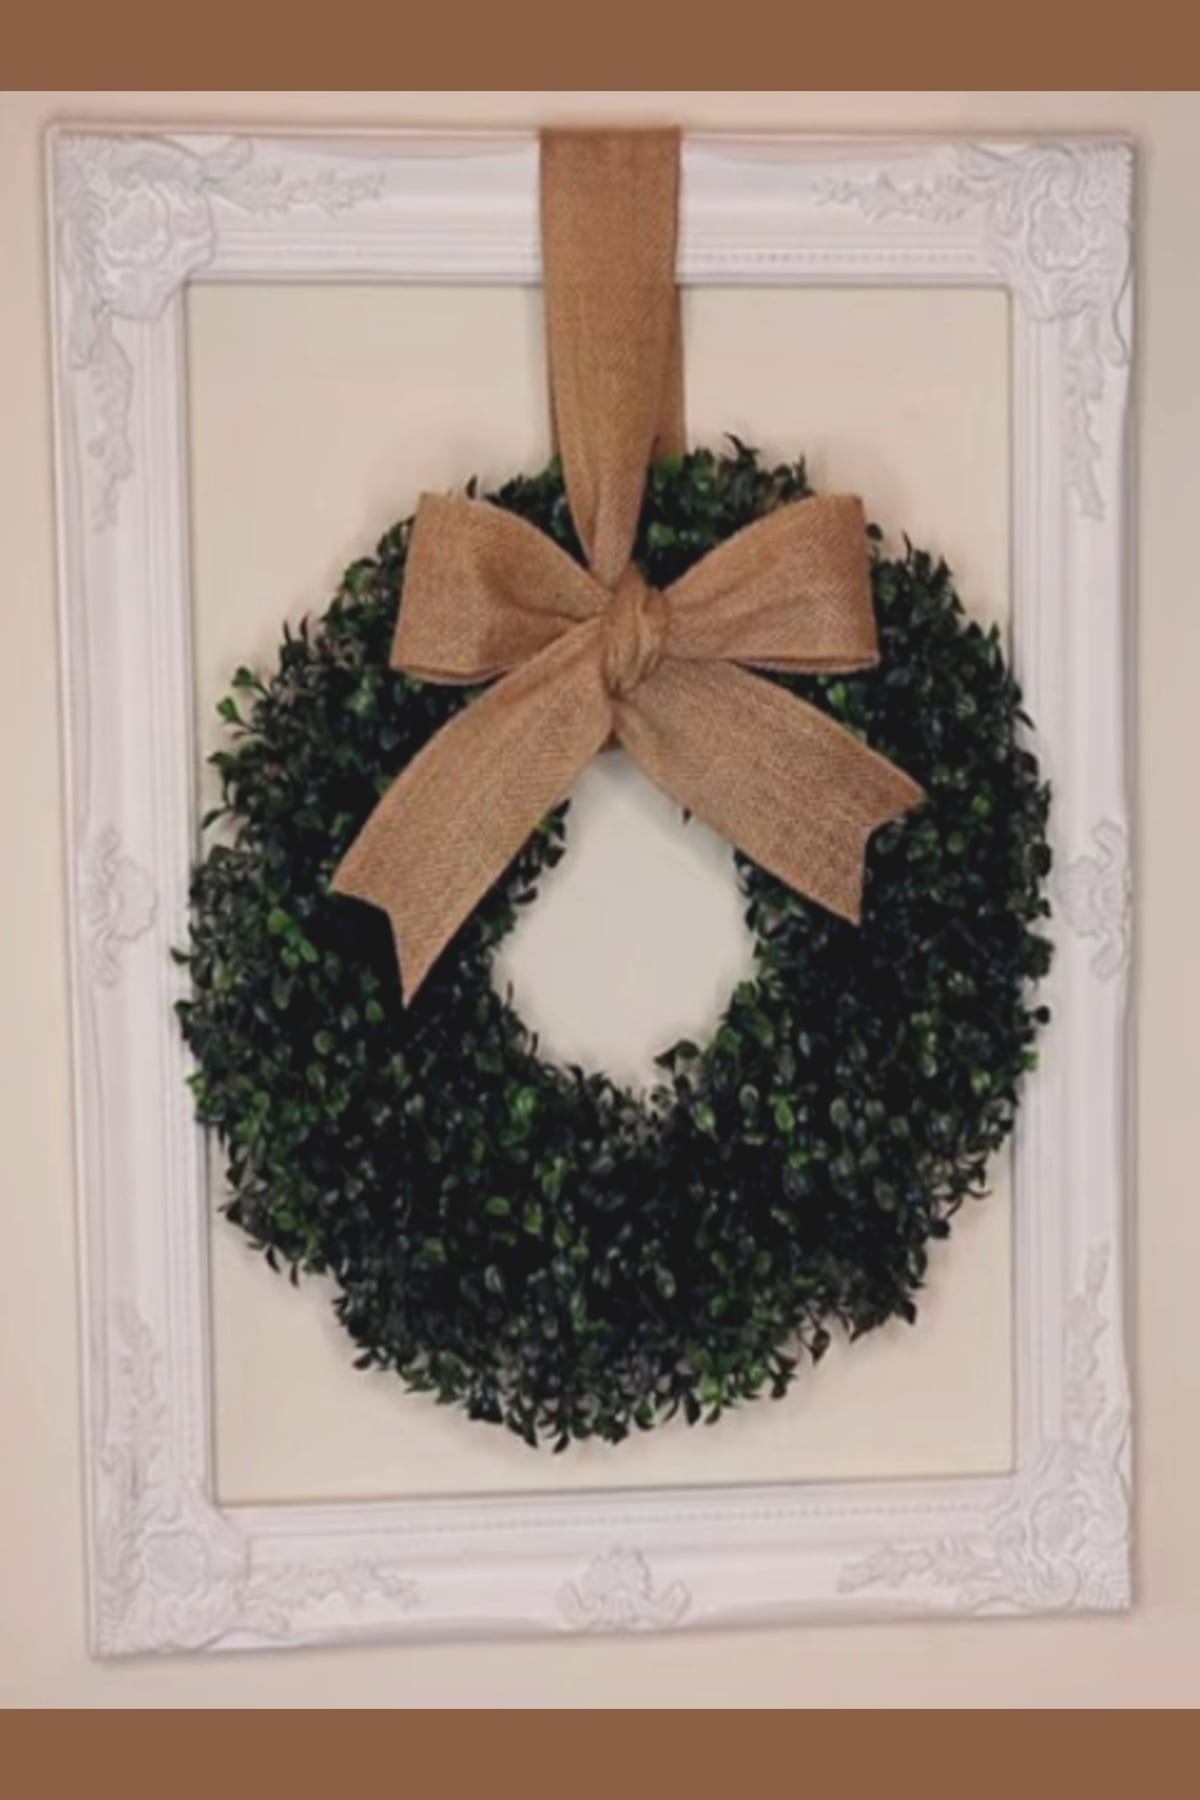 decorating with fake plants - DIY wall decor with artificial wreath in an old repurposed picture frame.